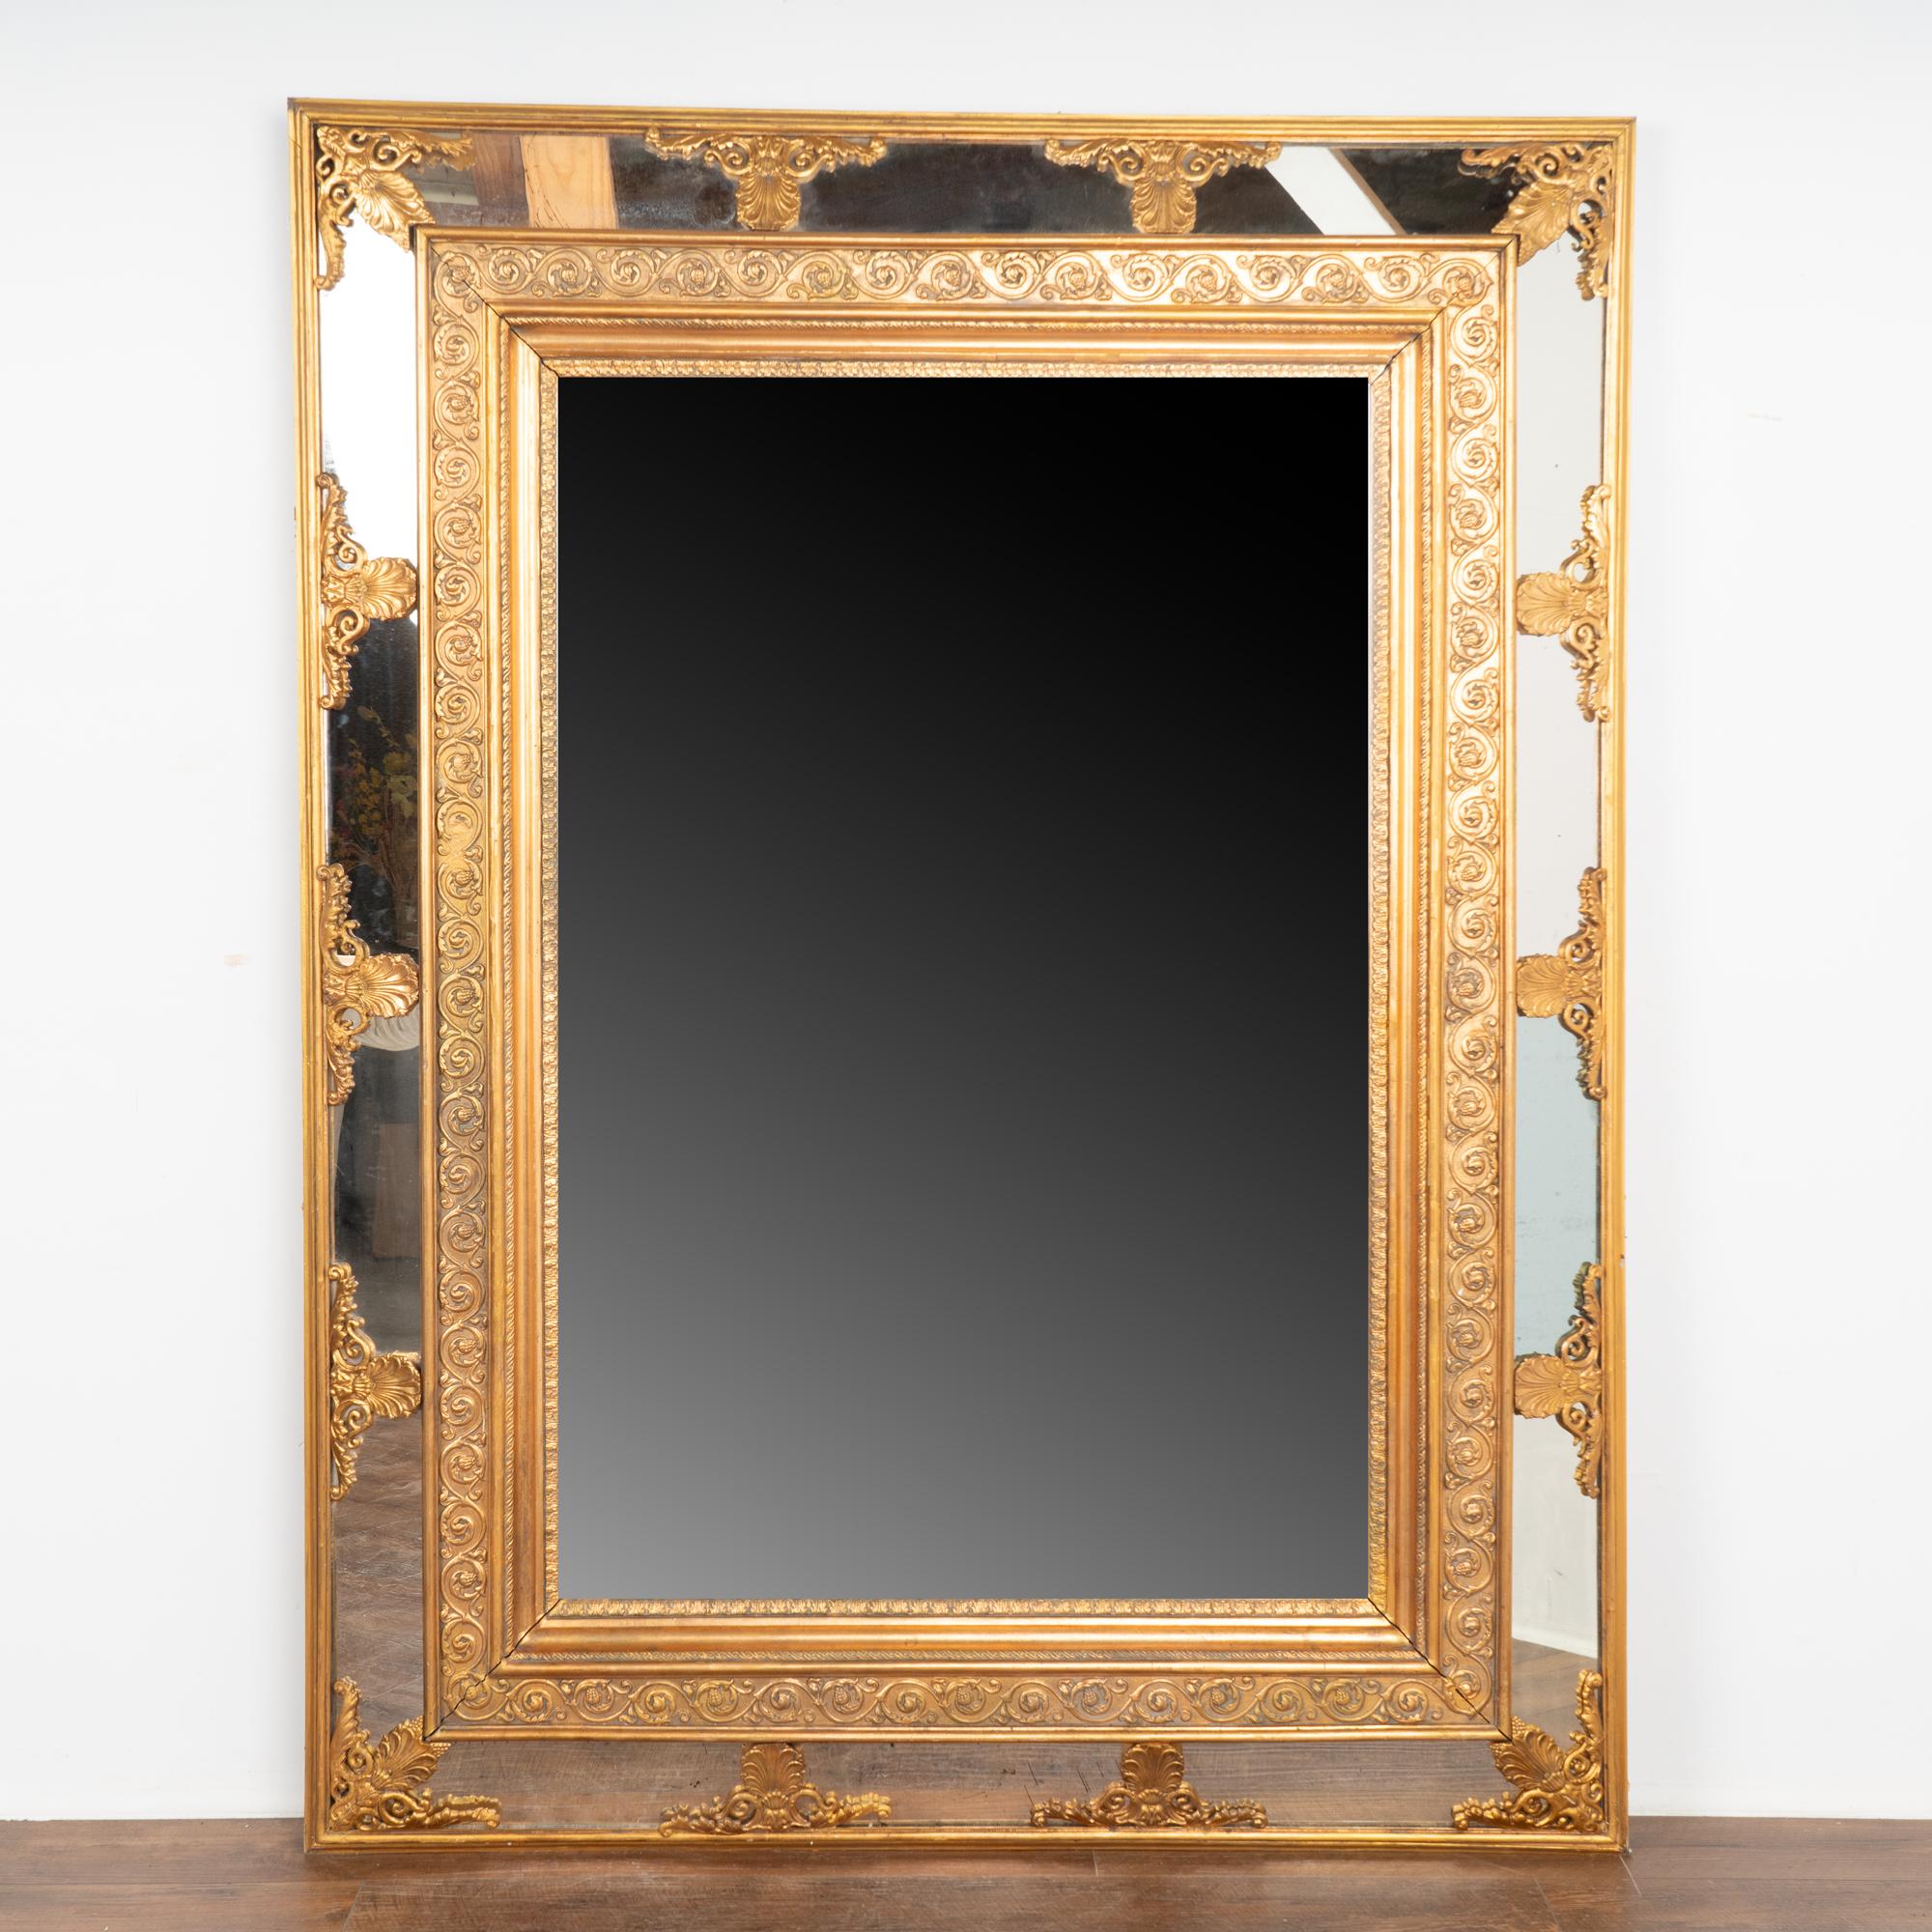 This impressive large 6' gold gilt mirror has scallop flourishes accenting the canted mirrored sides. 
There is expected age-related wear as seen where the gilt has been worn off, wood is nicked or cracked (including old repairs), aged separation at